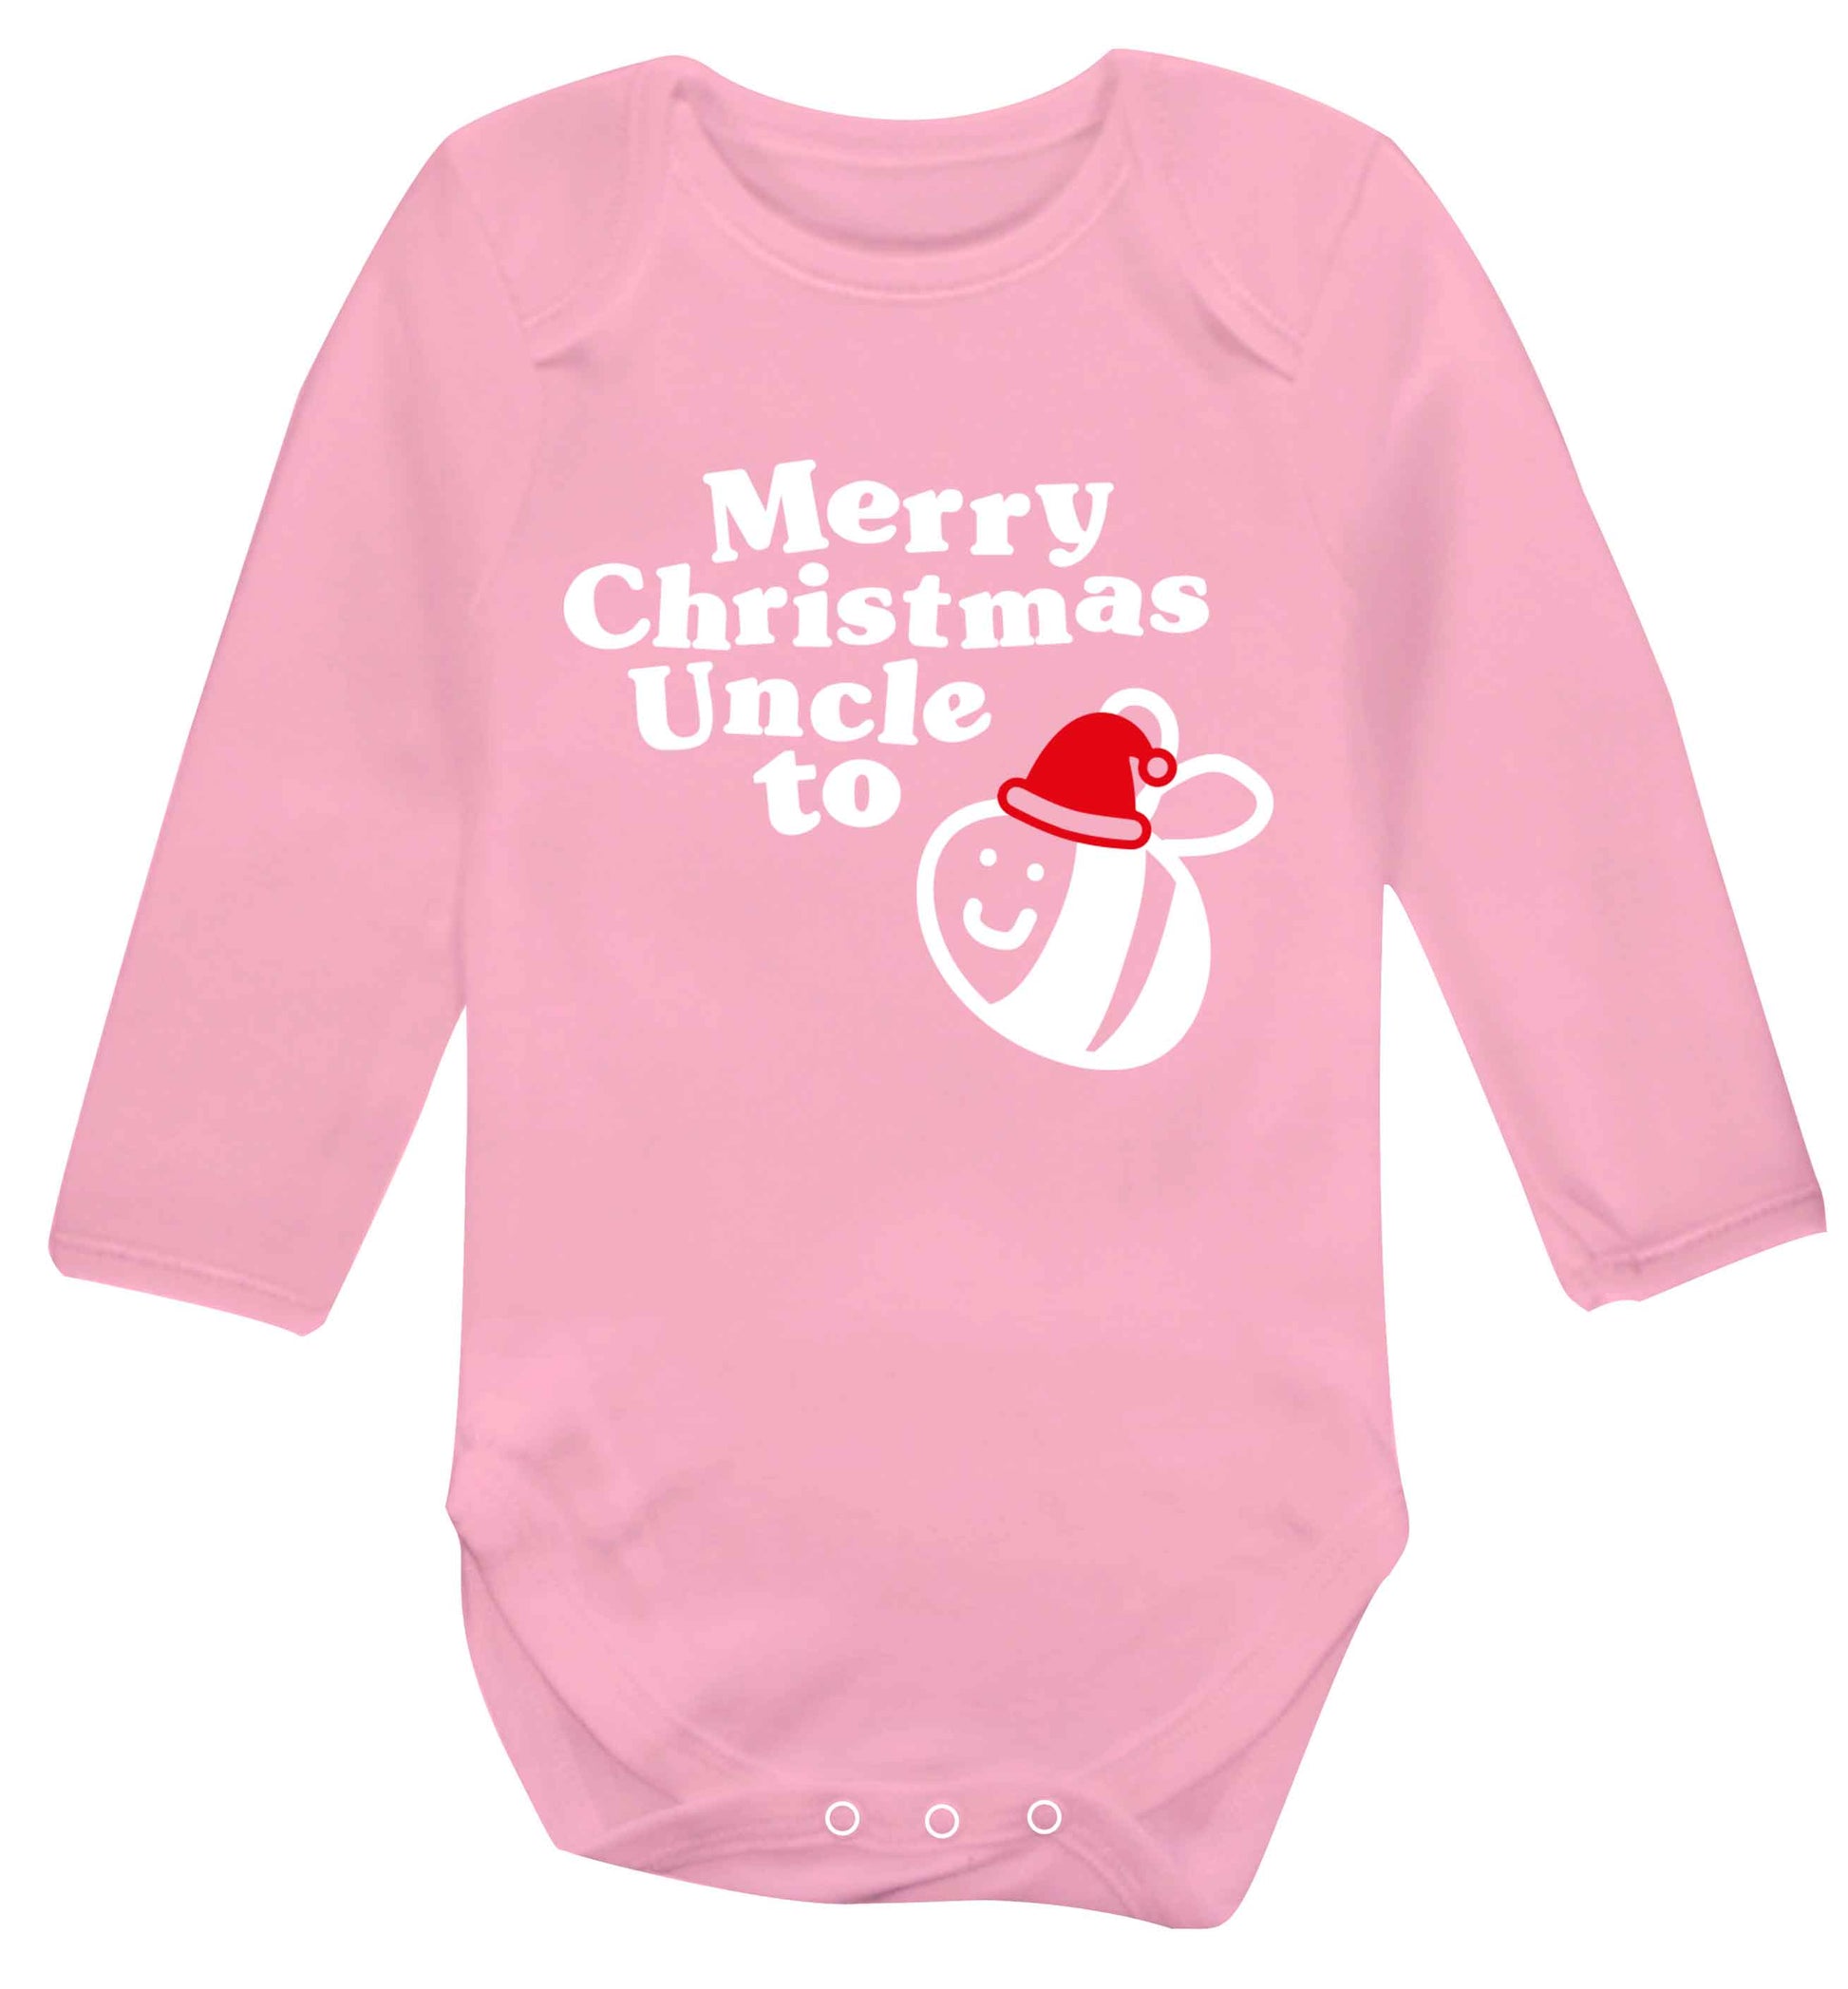 Merry Christmas uncle to be Baby Vest long sleeved pale pink 6-12 months